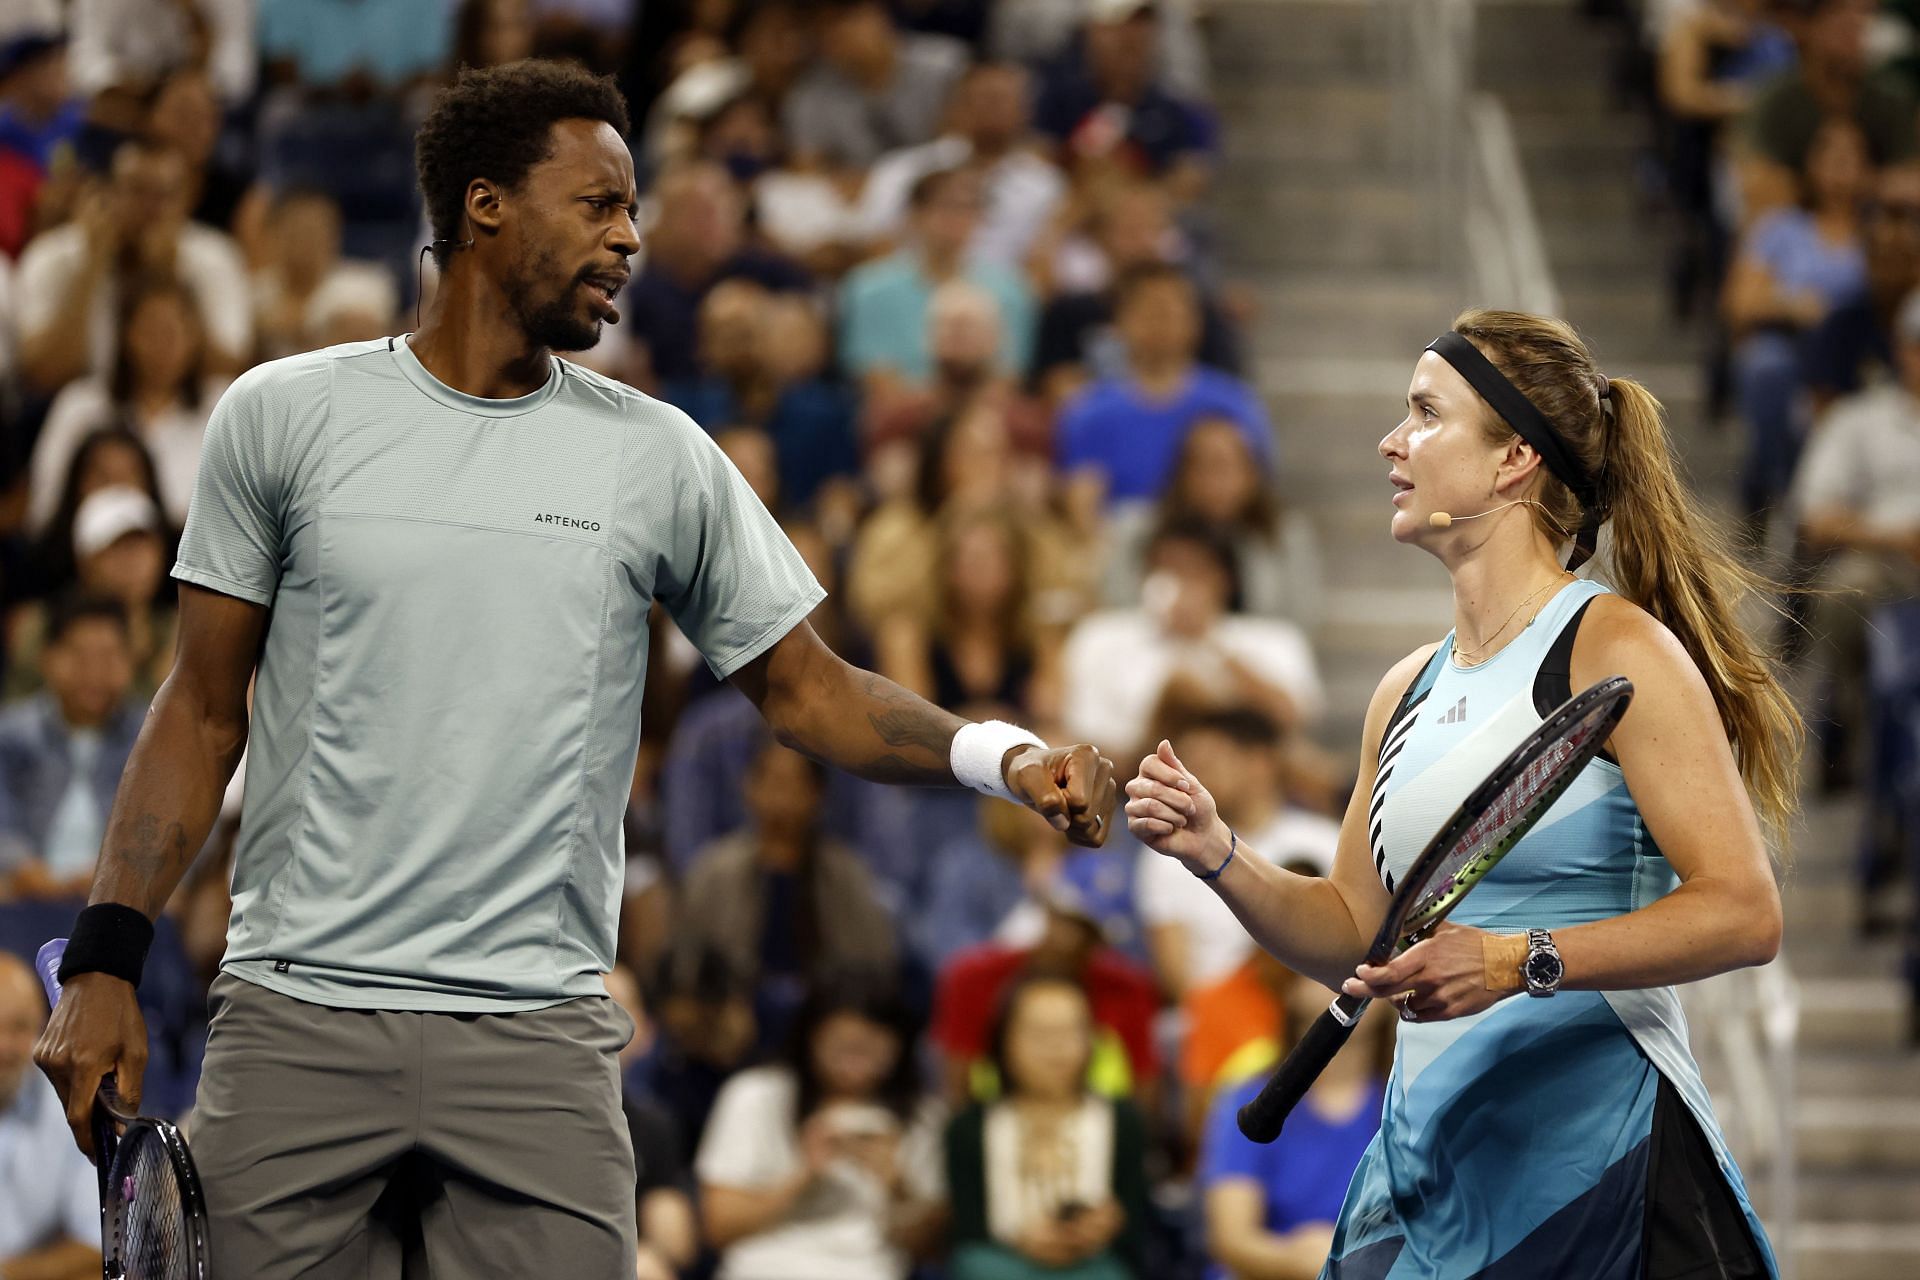 2023 US Open - Stars of the Open Exhibition Match to Benefit Ukraine Relief: Elina Svitolina and Gael Monfils